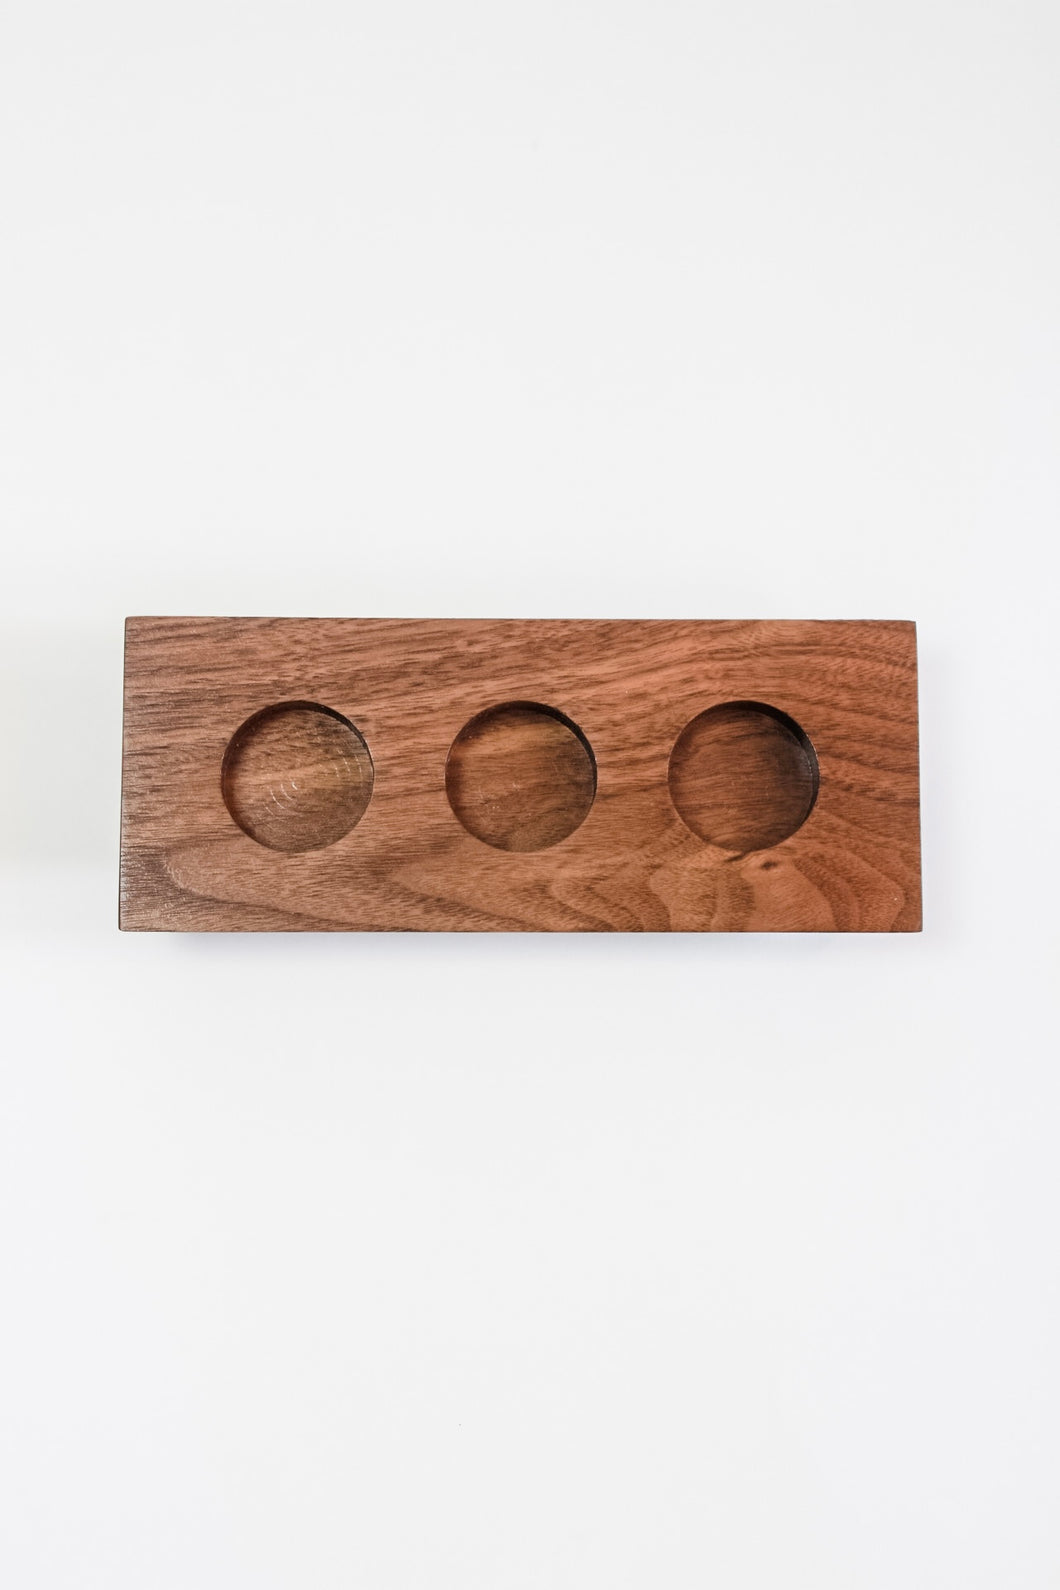 Solid walnut 3-hole tealight candle holder featuring maple accents.